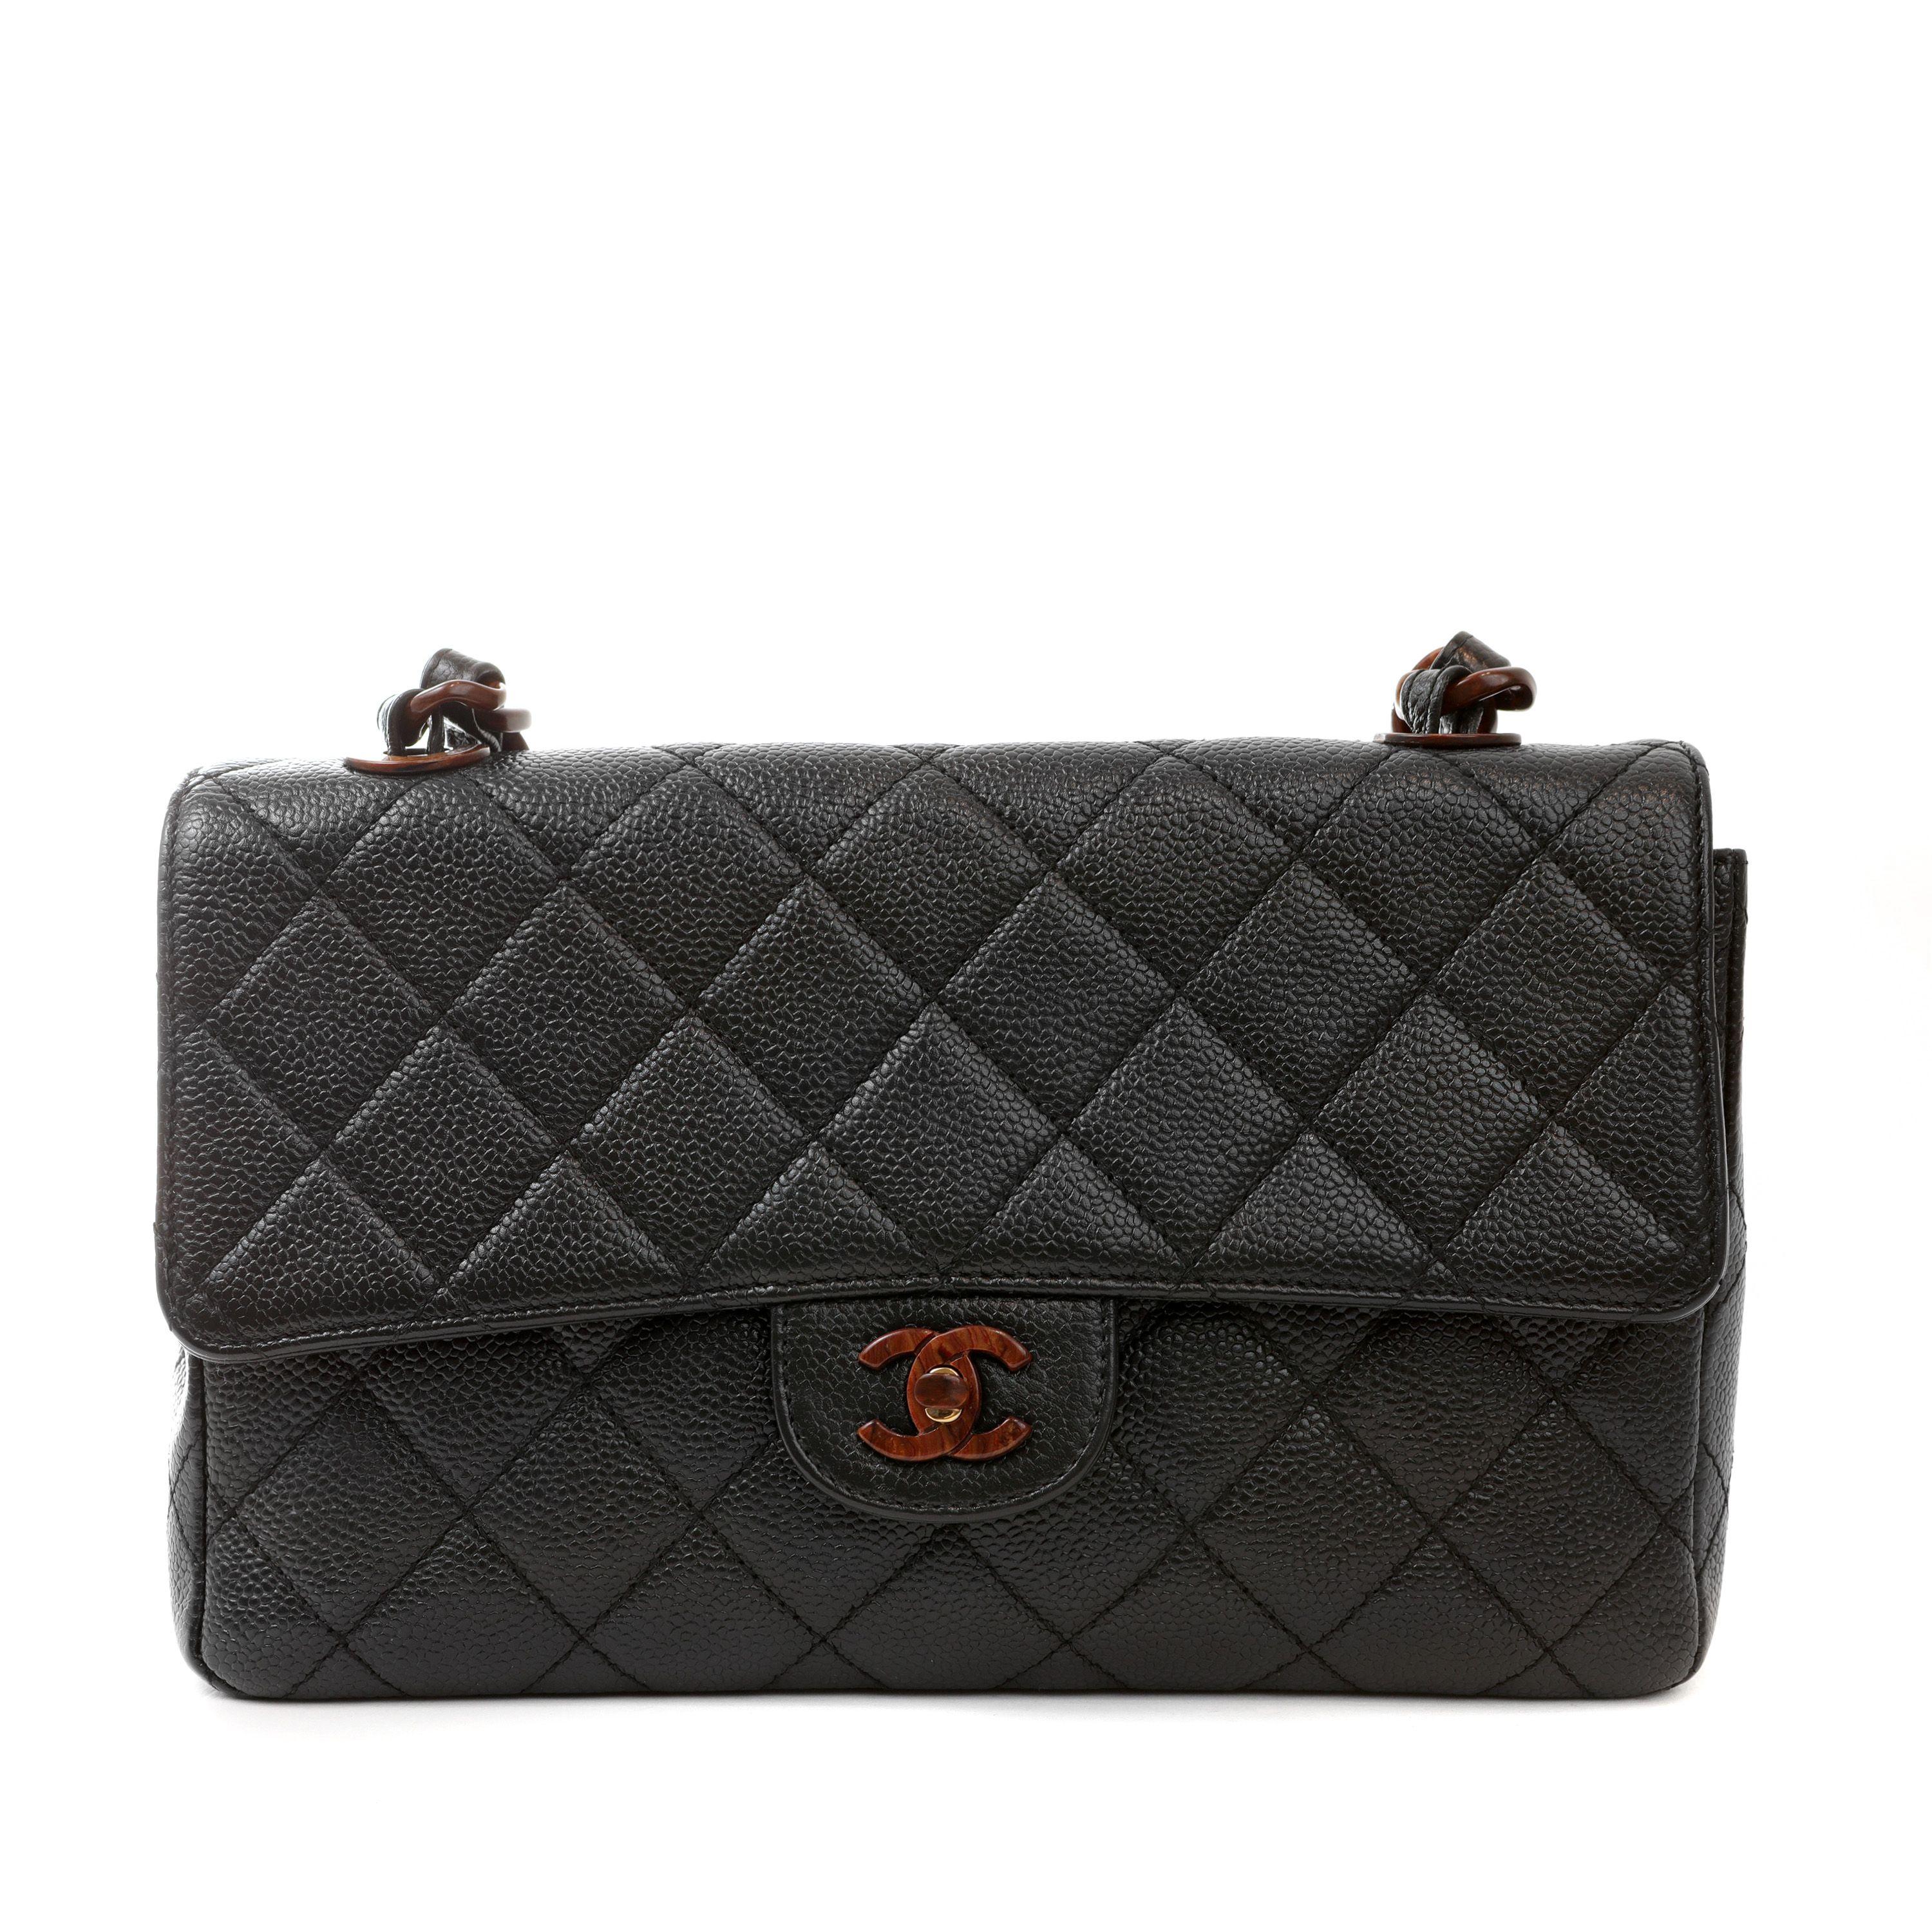 This authentic Chanel Black Caviar Medium Classic Flap with Burled Wood Hardware is in excellent condition.  Rare and collectible, this Classic has extremely rare contrasting wood CC clasp and intertwined strap. Dust bag included. 
Measurements: